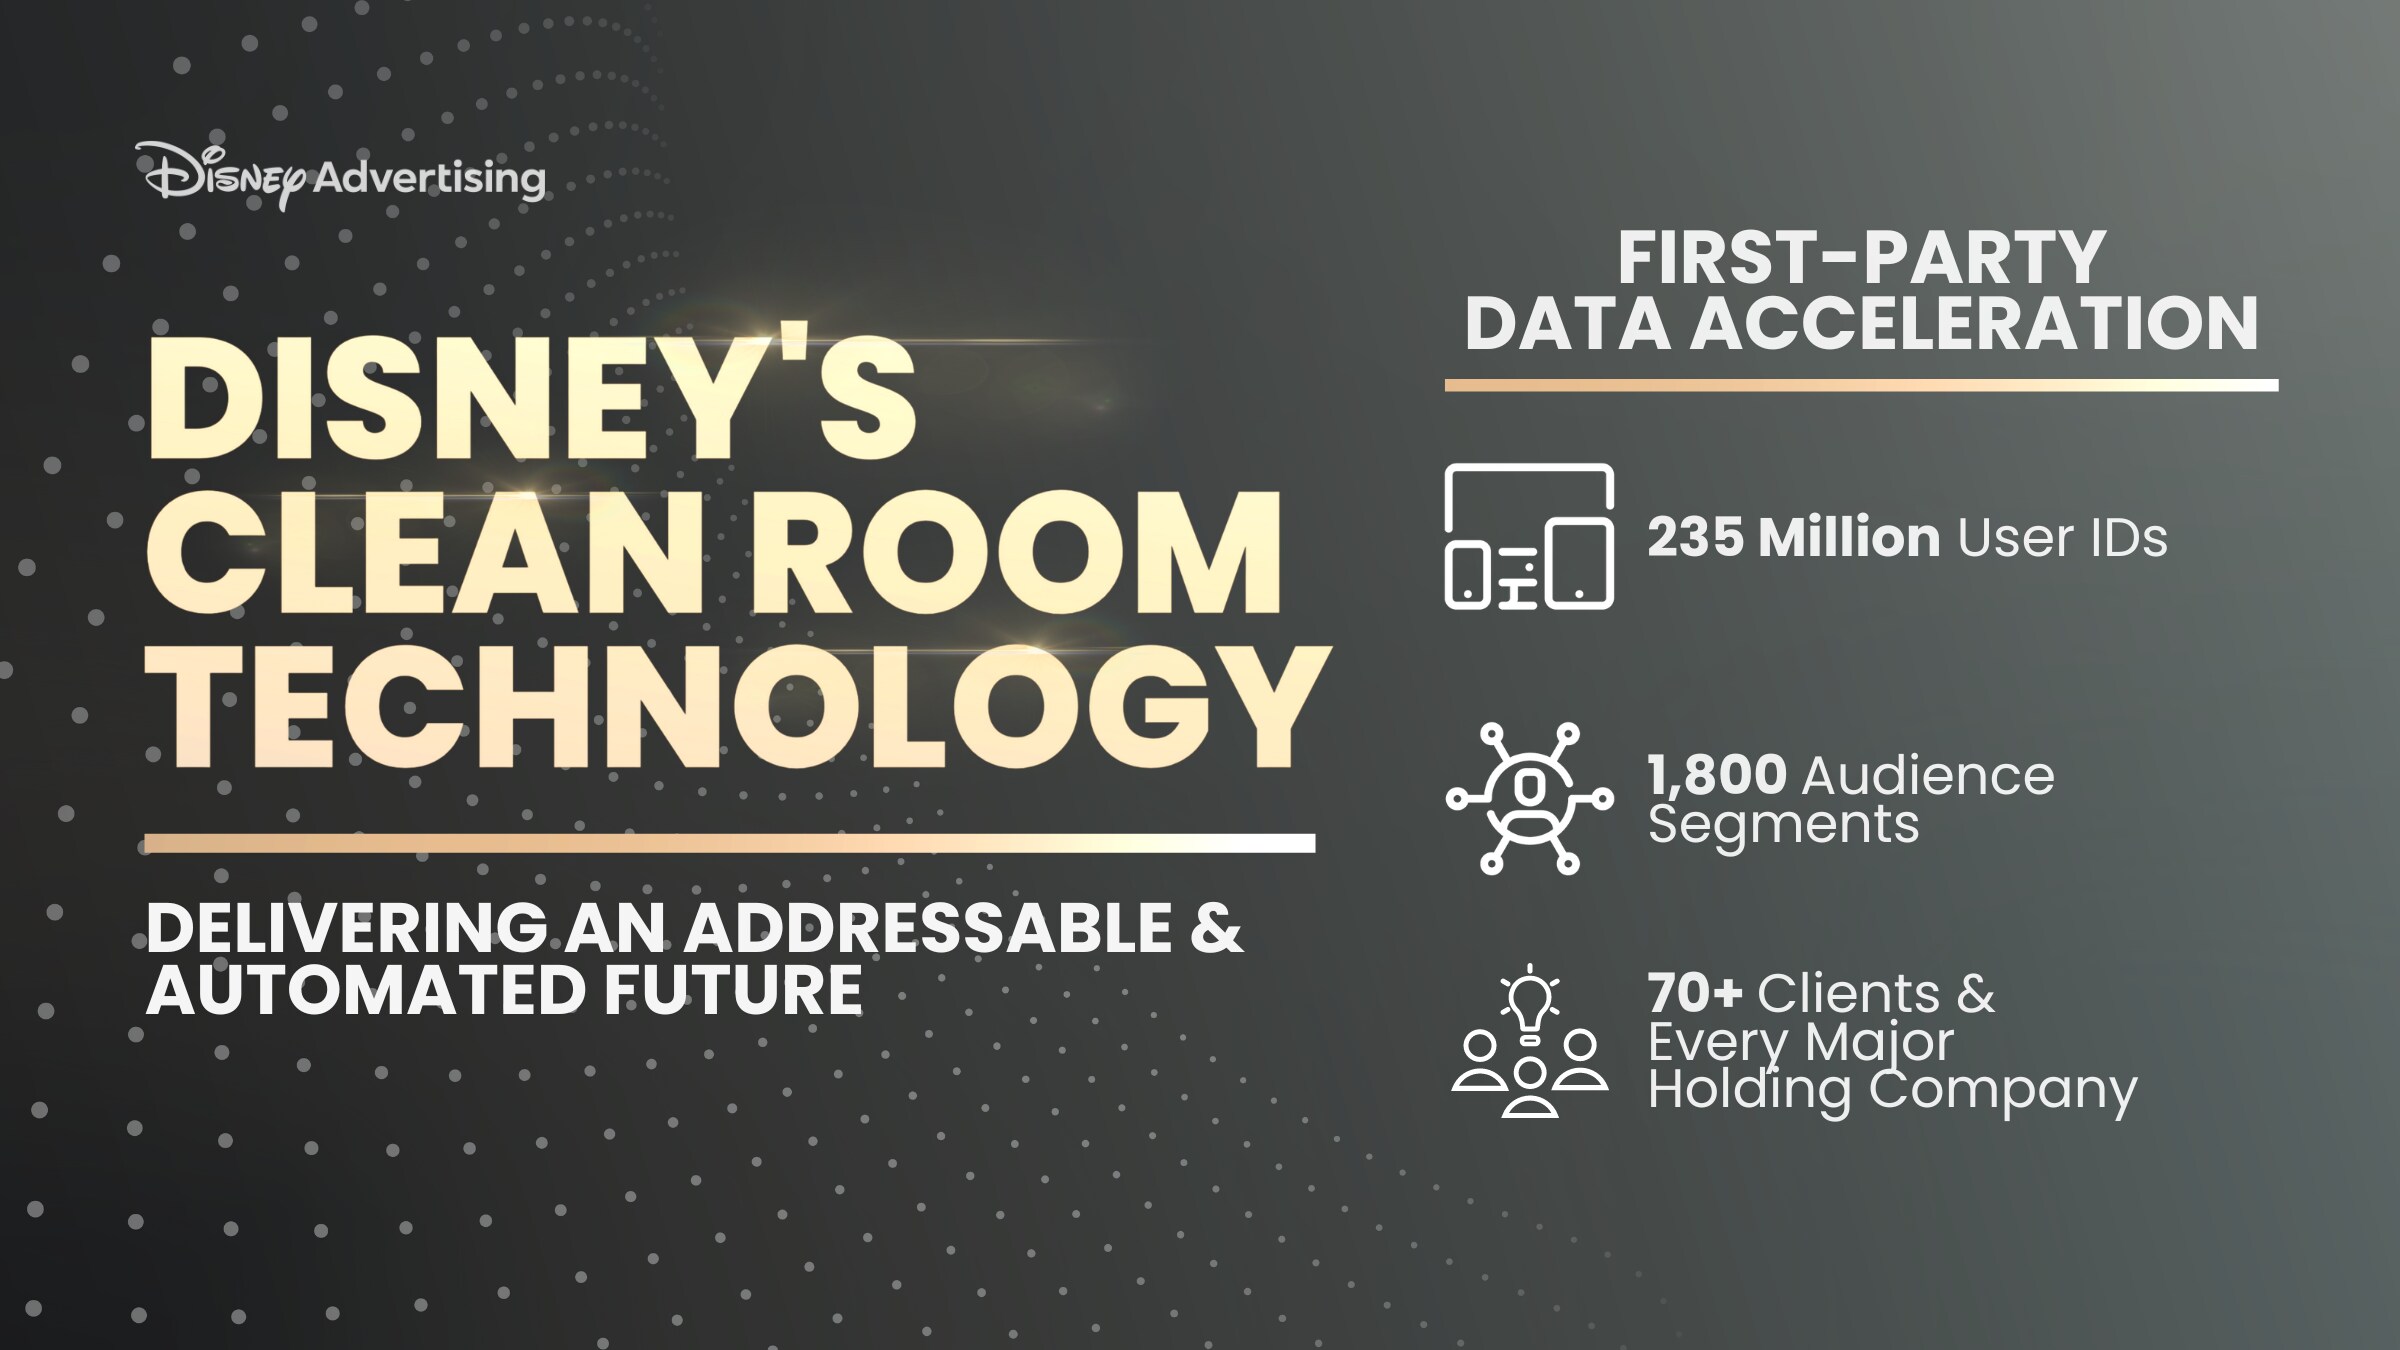 Disney’s State-Of-The-Art Audience Graph Fuels Rapid Adoption Of Clean Room Technology 